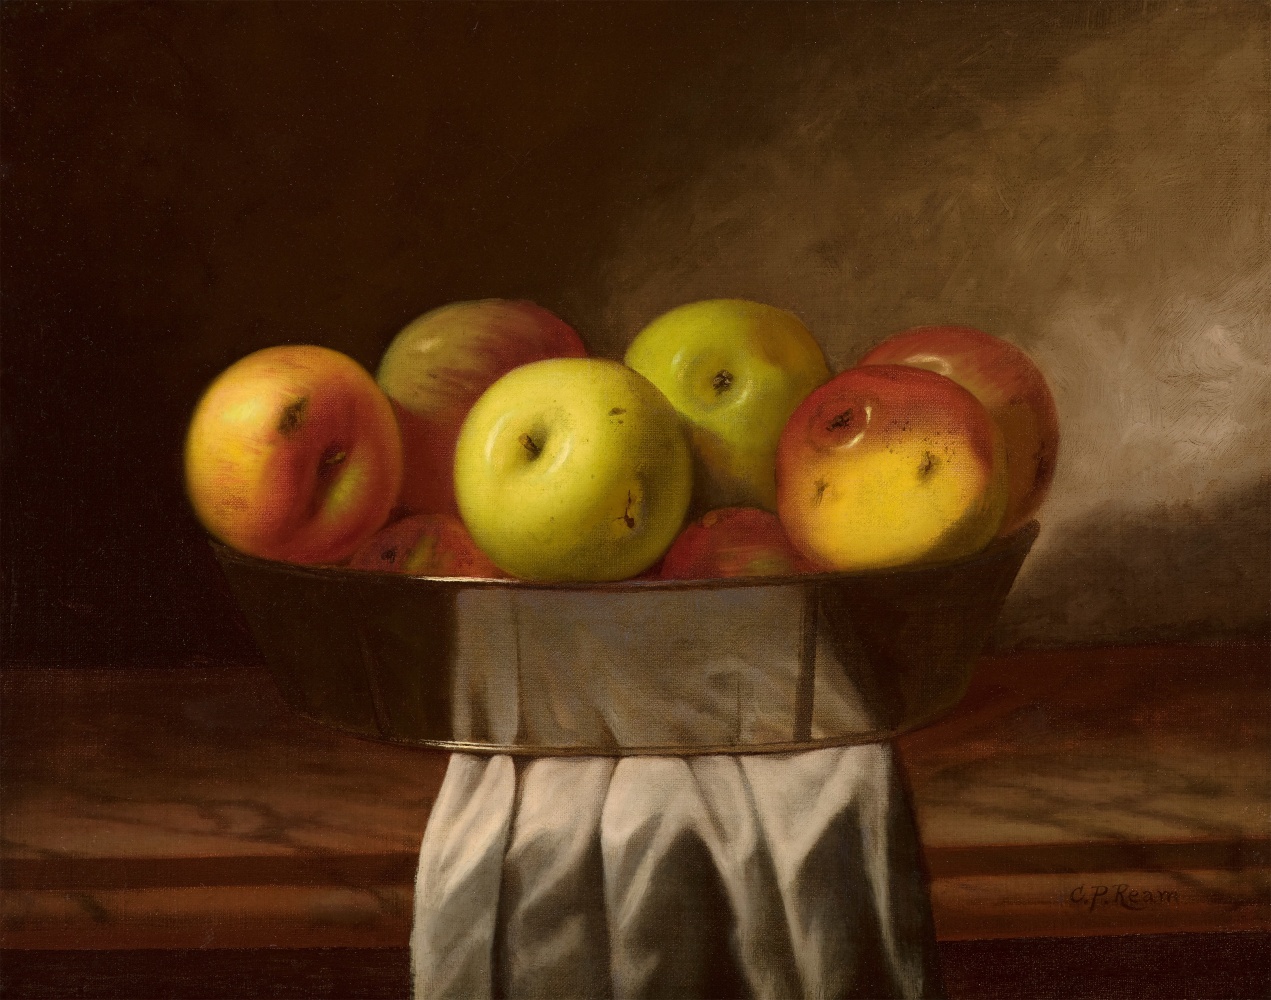 Cadurcis P. Ream (1837–1917), Still Life with Apples, c. 1870, oil on canvas, 16 x 20 in., signed lower right: C. P. Ream